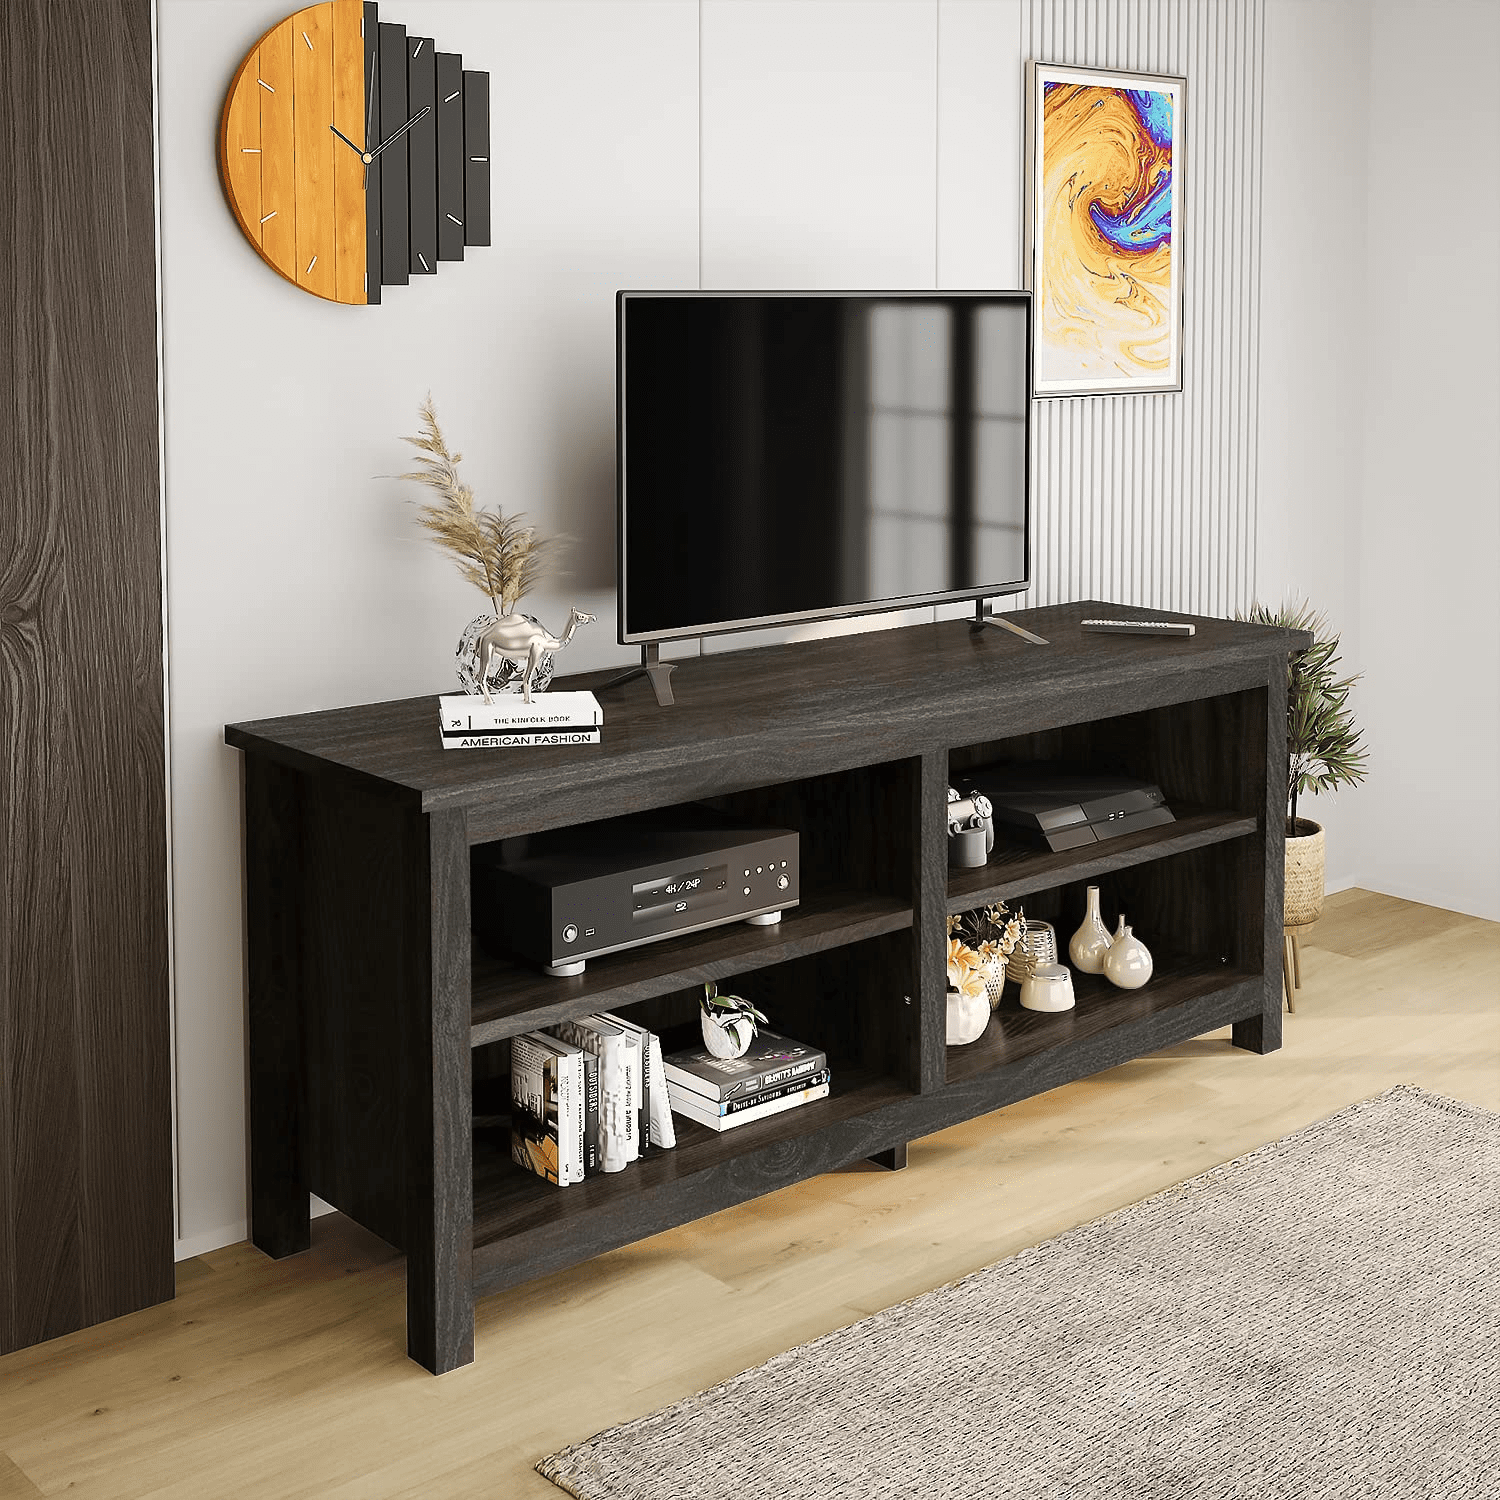 47 in TV Stand Console with Storage Shelves Cabinet in Black and Cherry Wood 